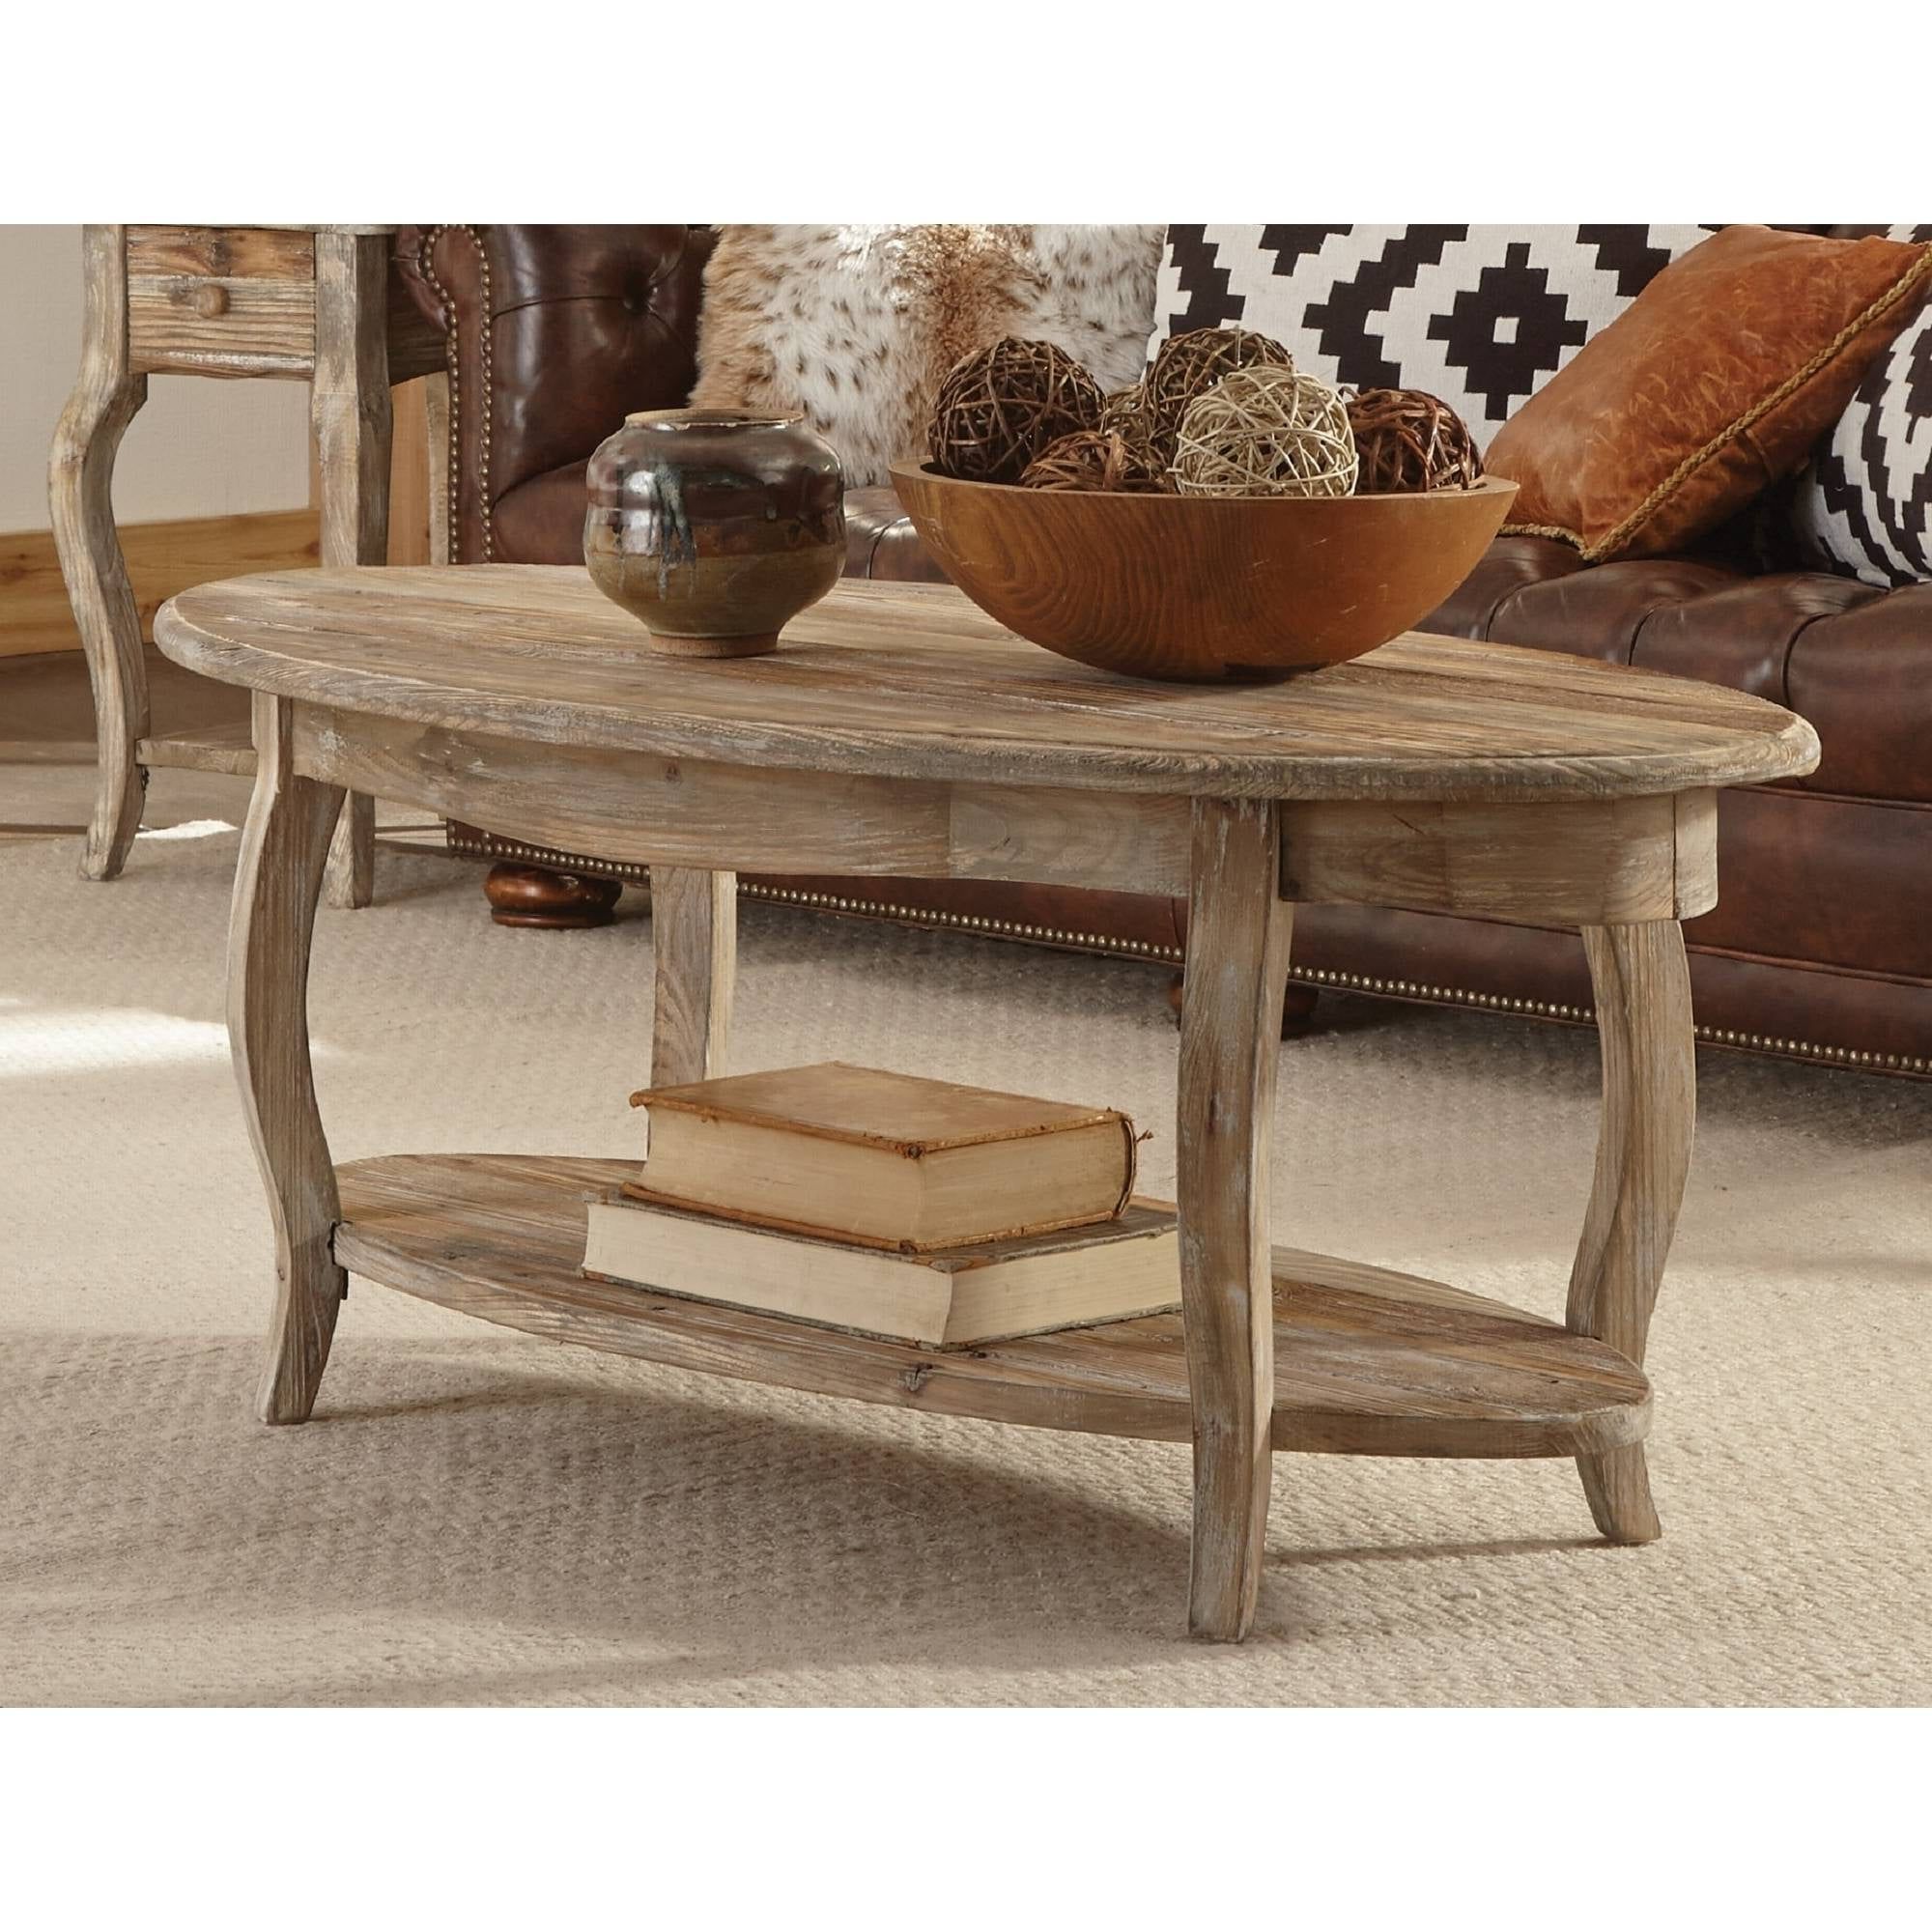 Rustic Coffee Tables Intended For Favorite Alaterre Rustic Reclaimed Oval Coffee Table, Driftwood – Walmart (View 7 of 15)